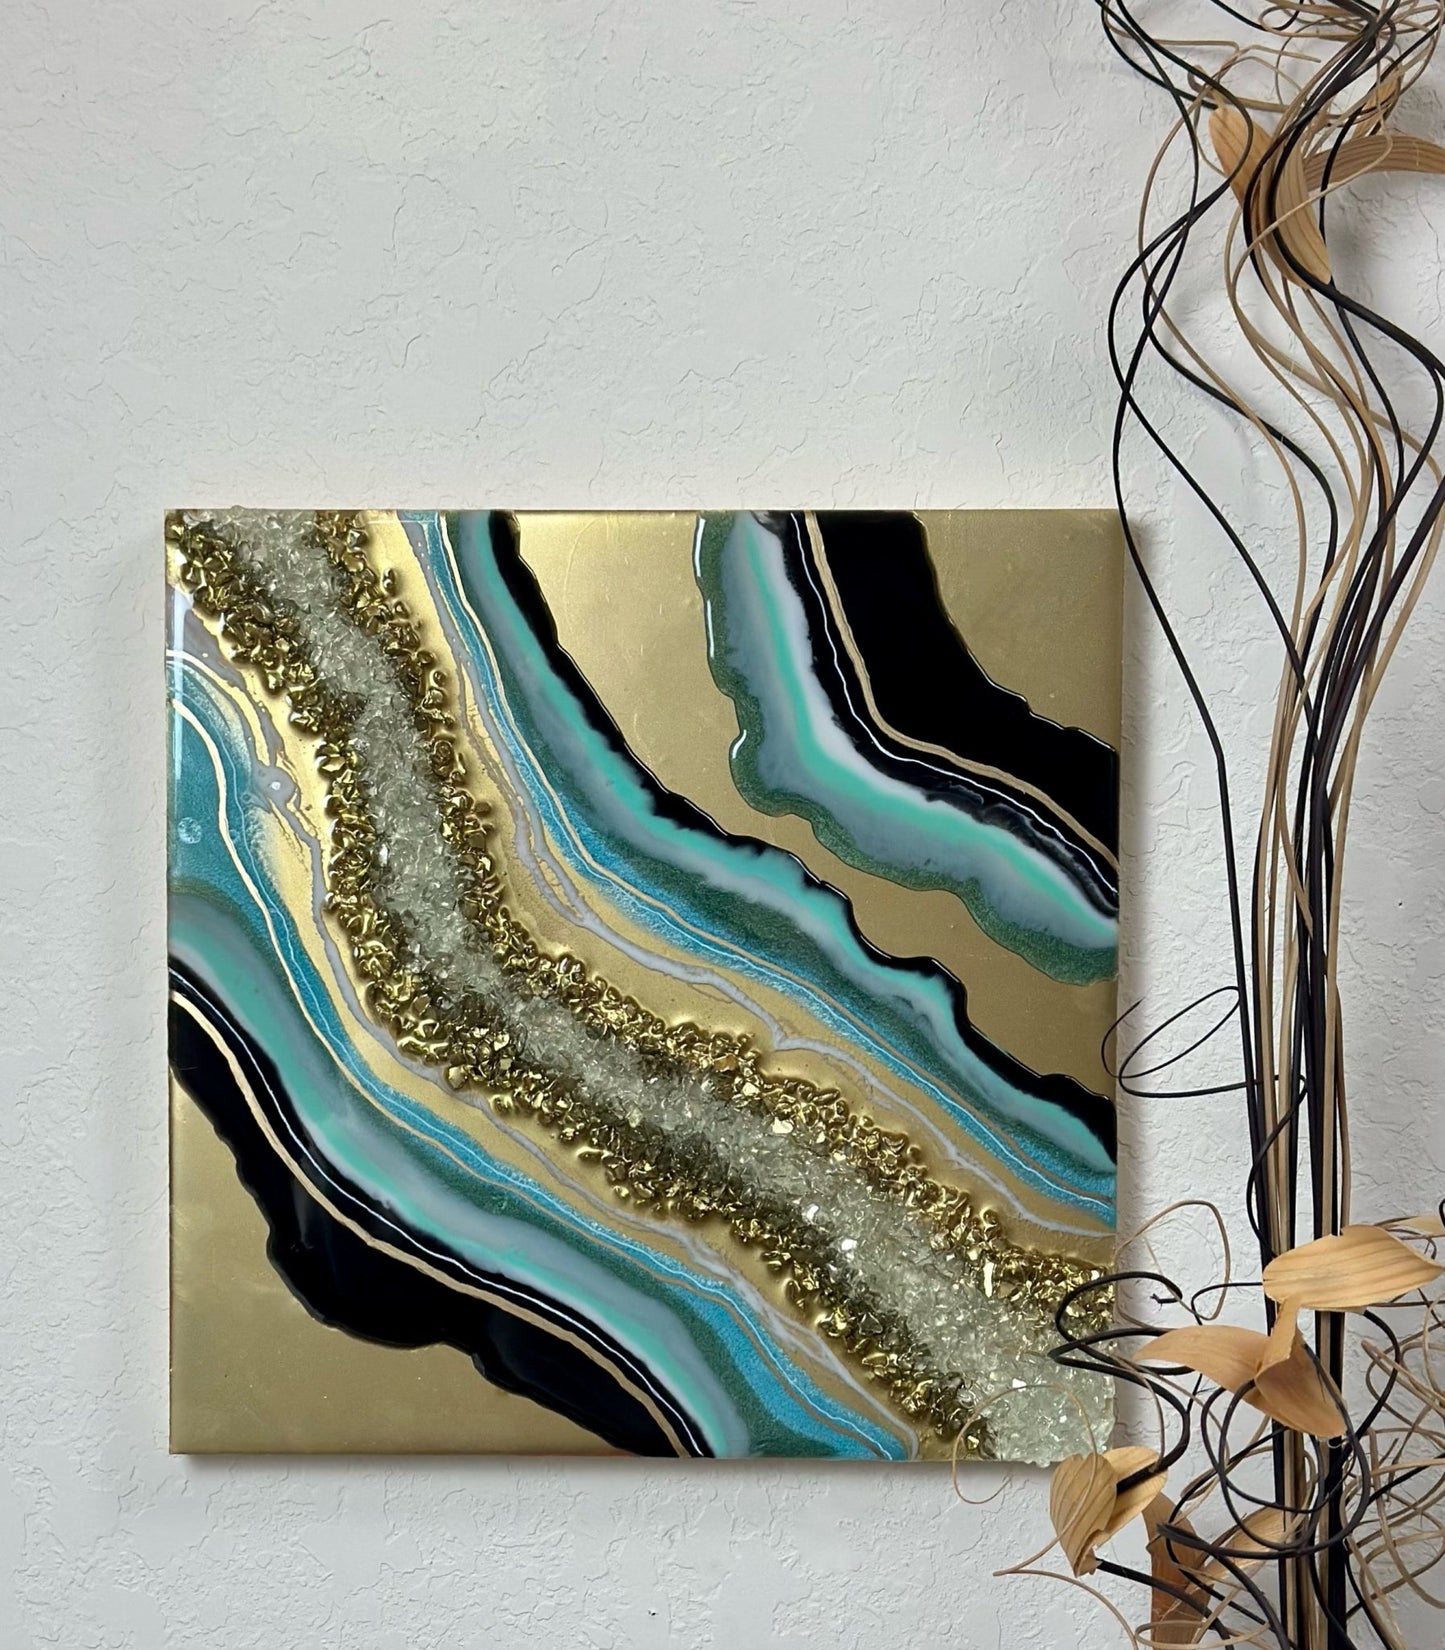 Geode in Teal + Black - Bragg About It Artistry